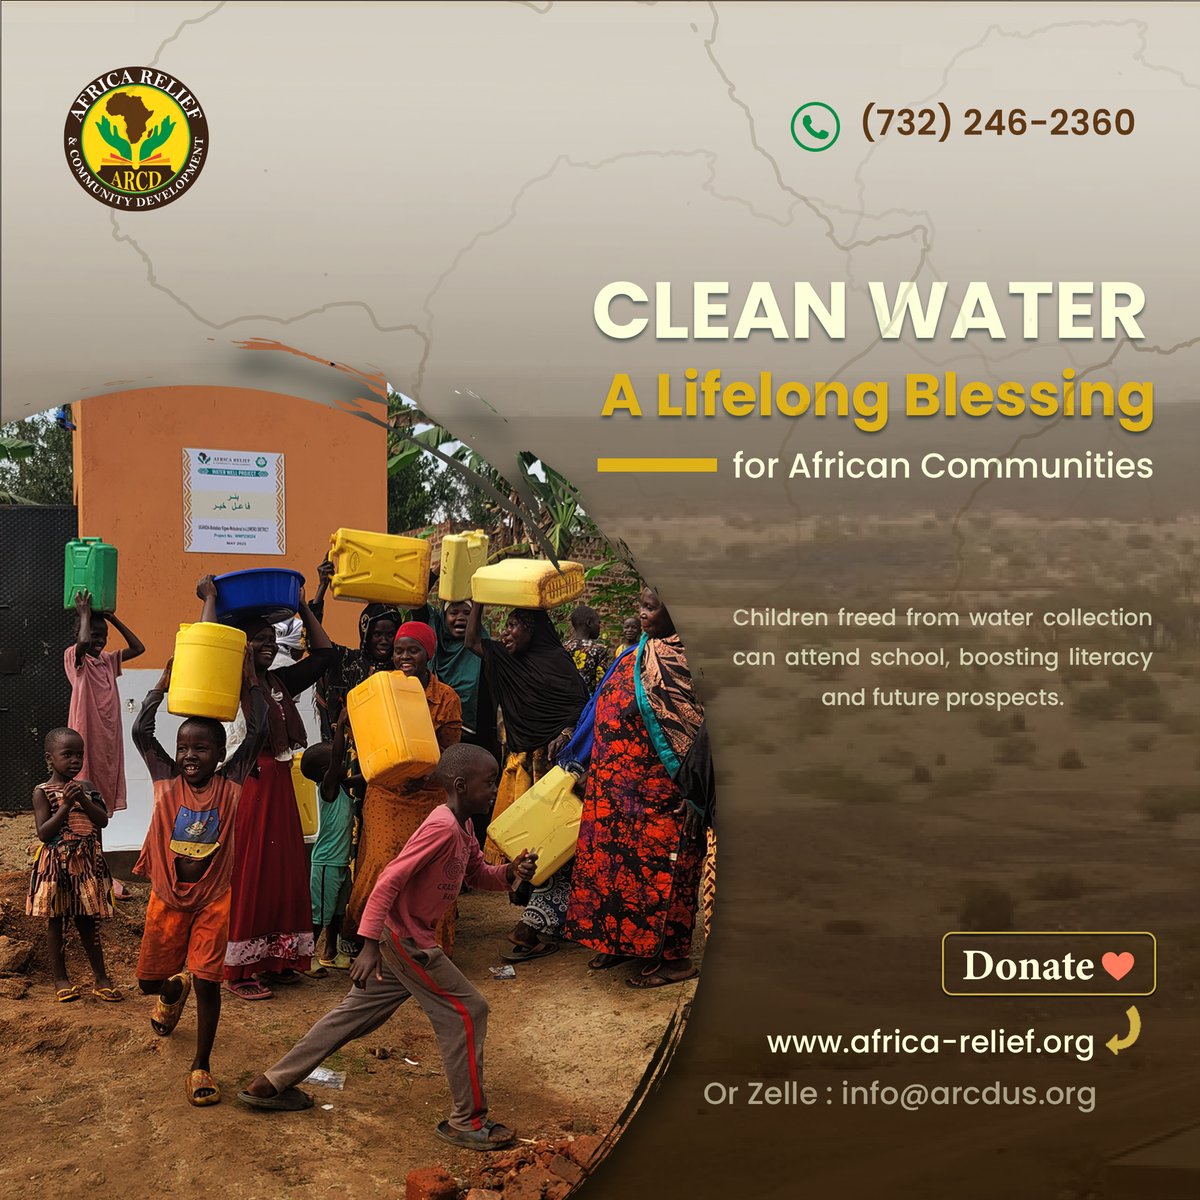 be the change today! 📷 #CleanWaterForAfrica #DonateForChange #WaterIsLife #ARCODTransforms
📷Donate Online: africa-relief.org/giving-tuesday…
📷Donate with Zelle: Call (732) 246-2360
#givingeverytuesday #african #GiveHope #givingtuesday #GivingTuesday #communitydevelopment #GivingBack